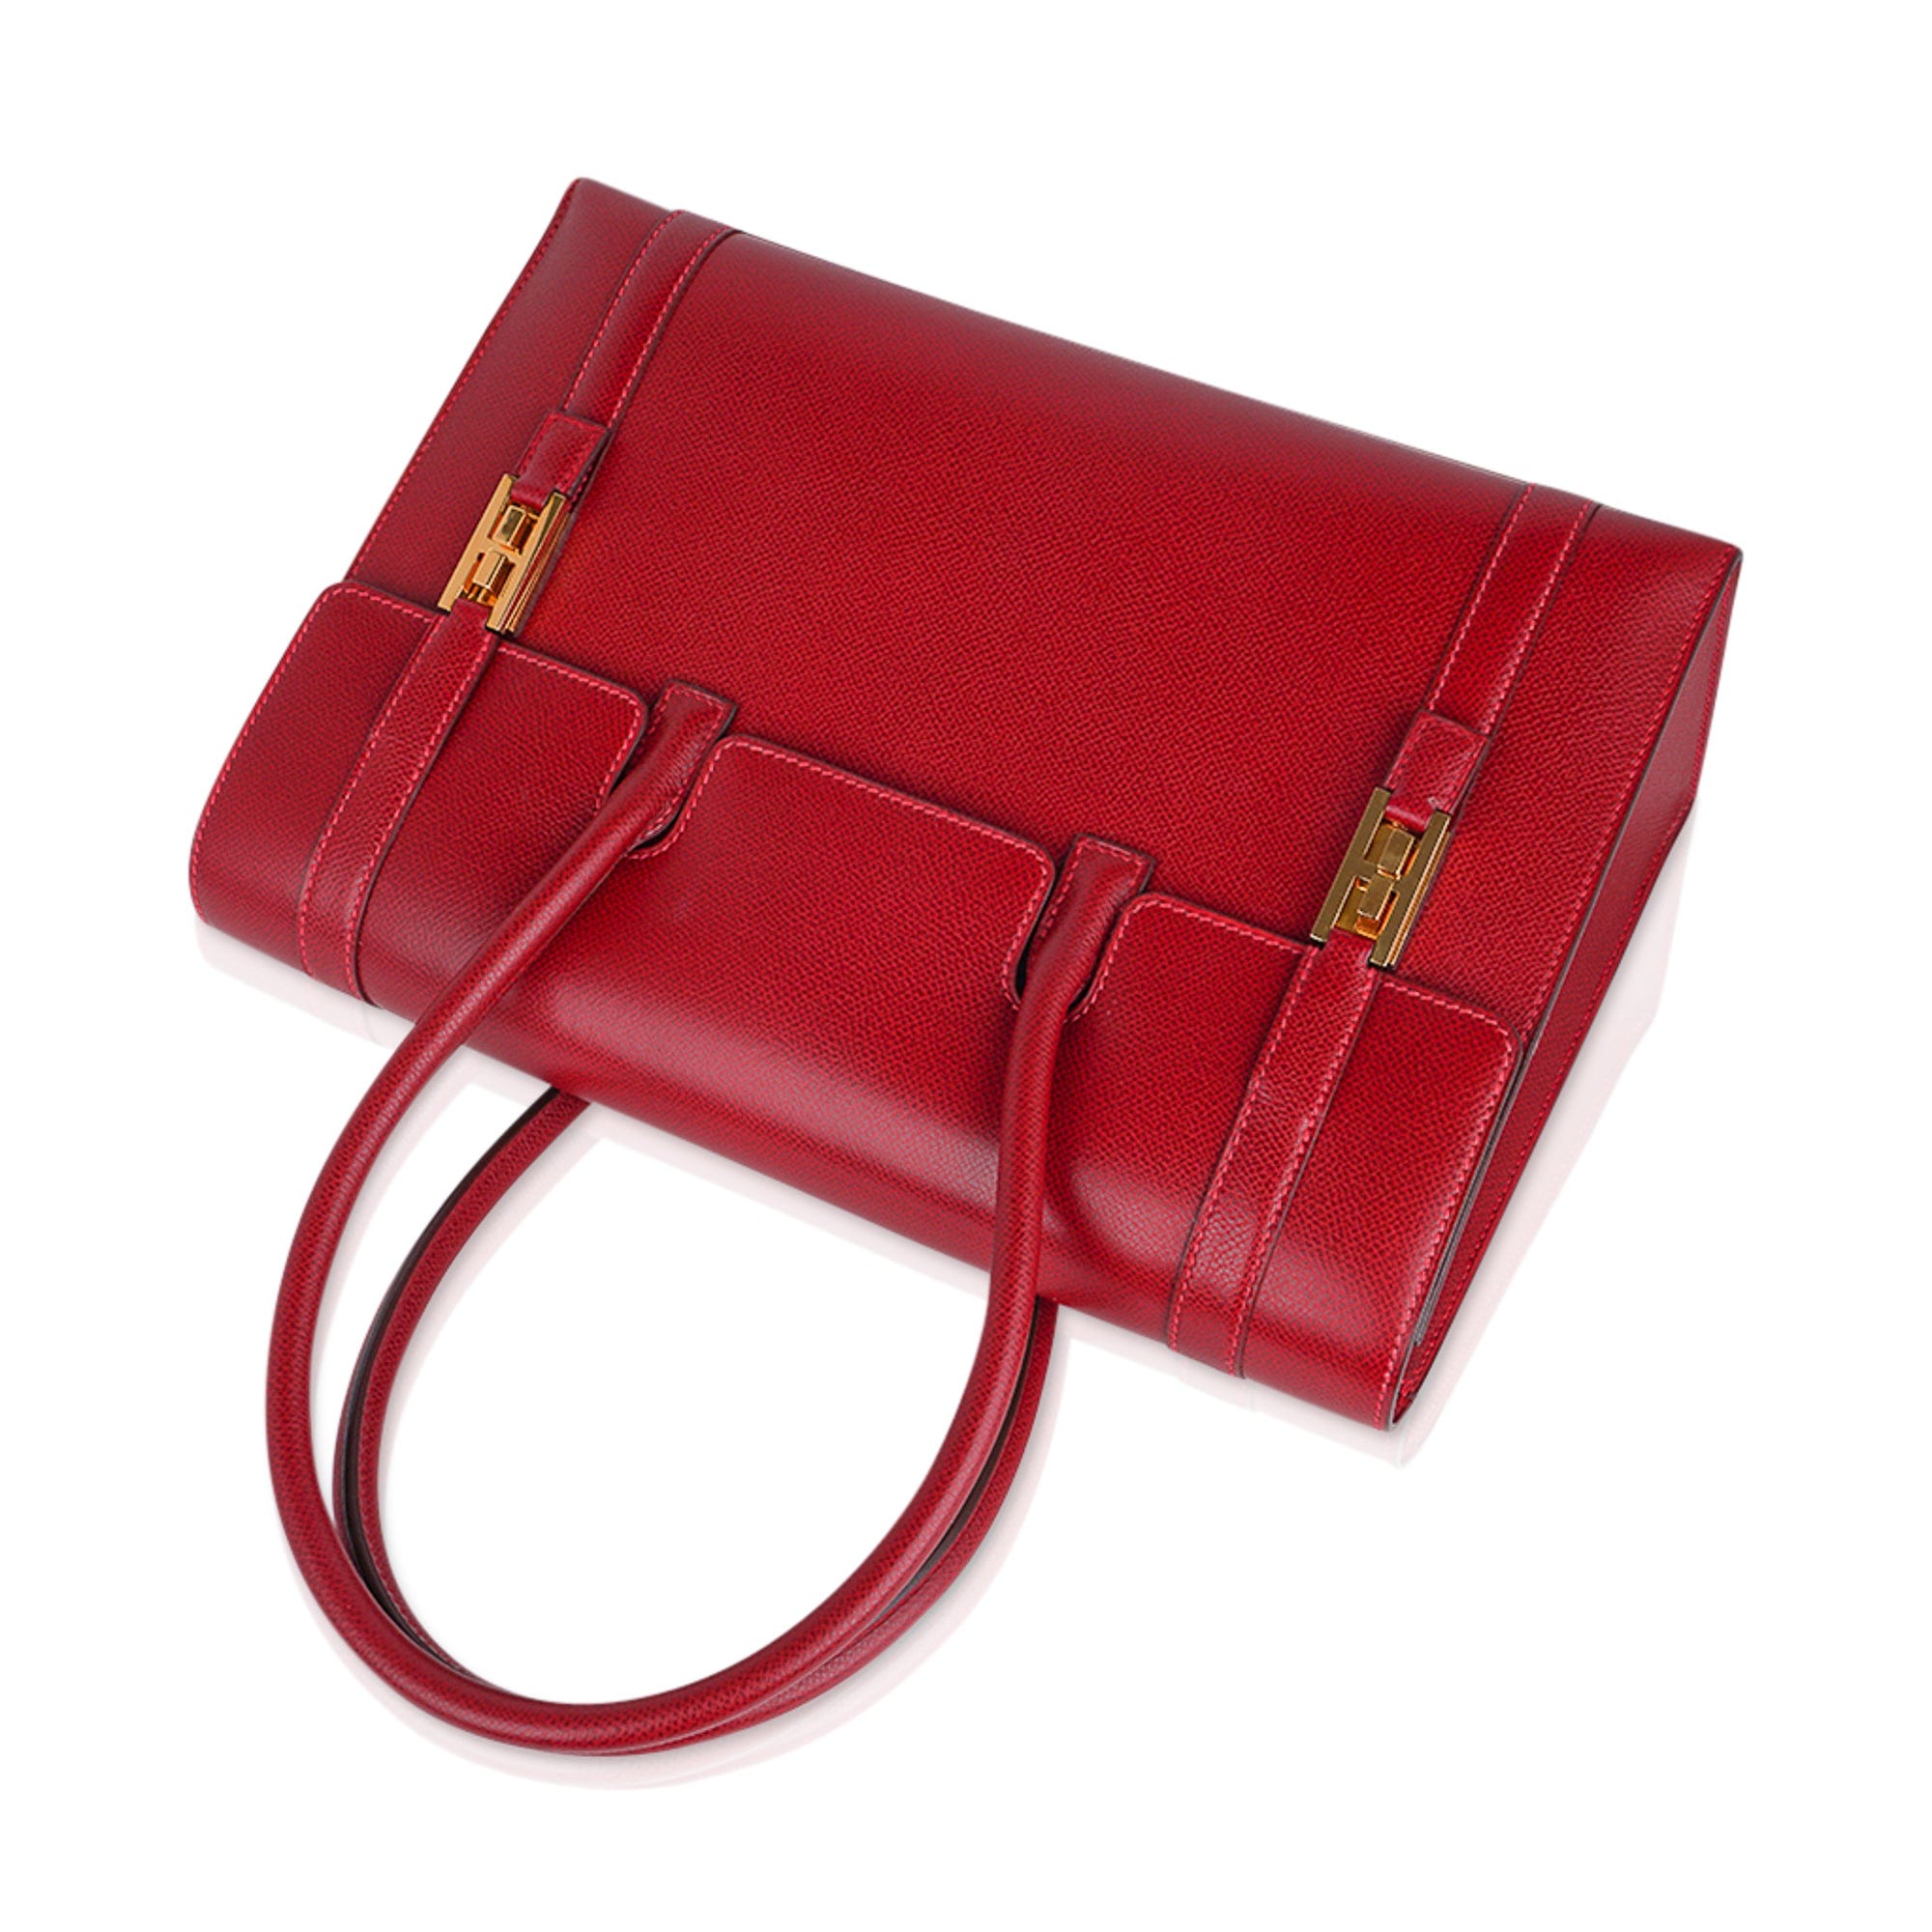 Authentic Hermes Drag 27 In Rouge H Box Calf Excellent Condition!